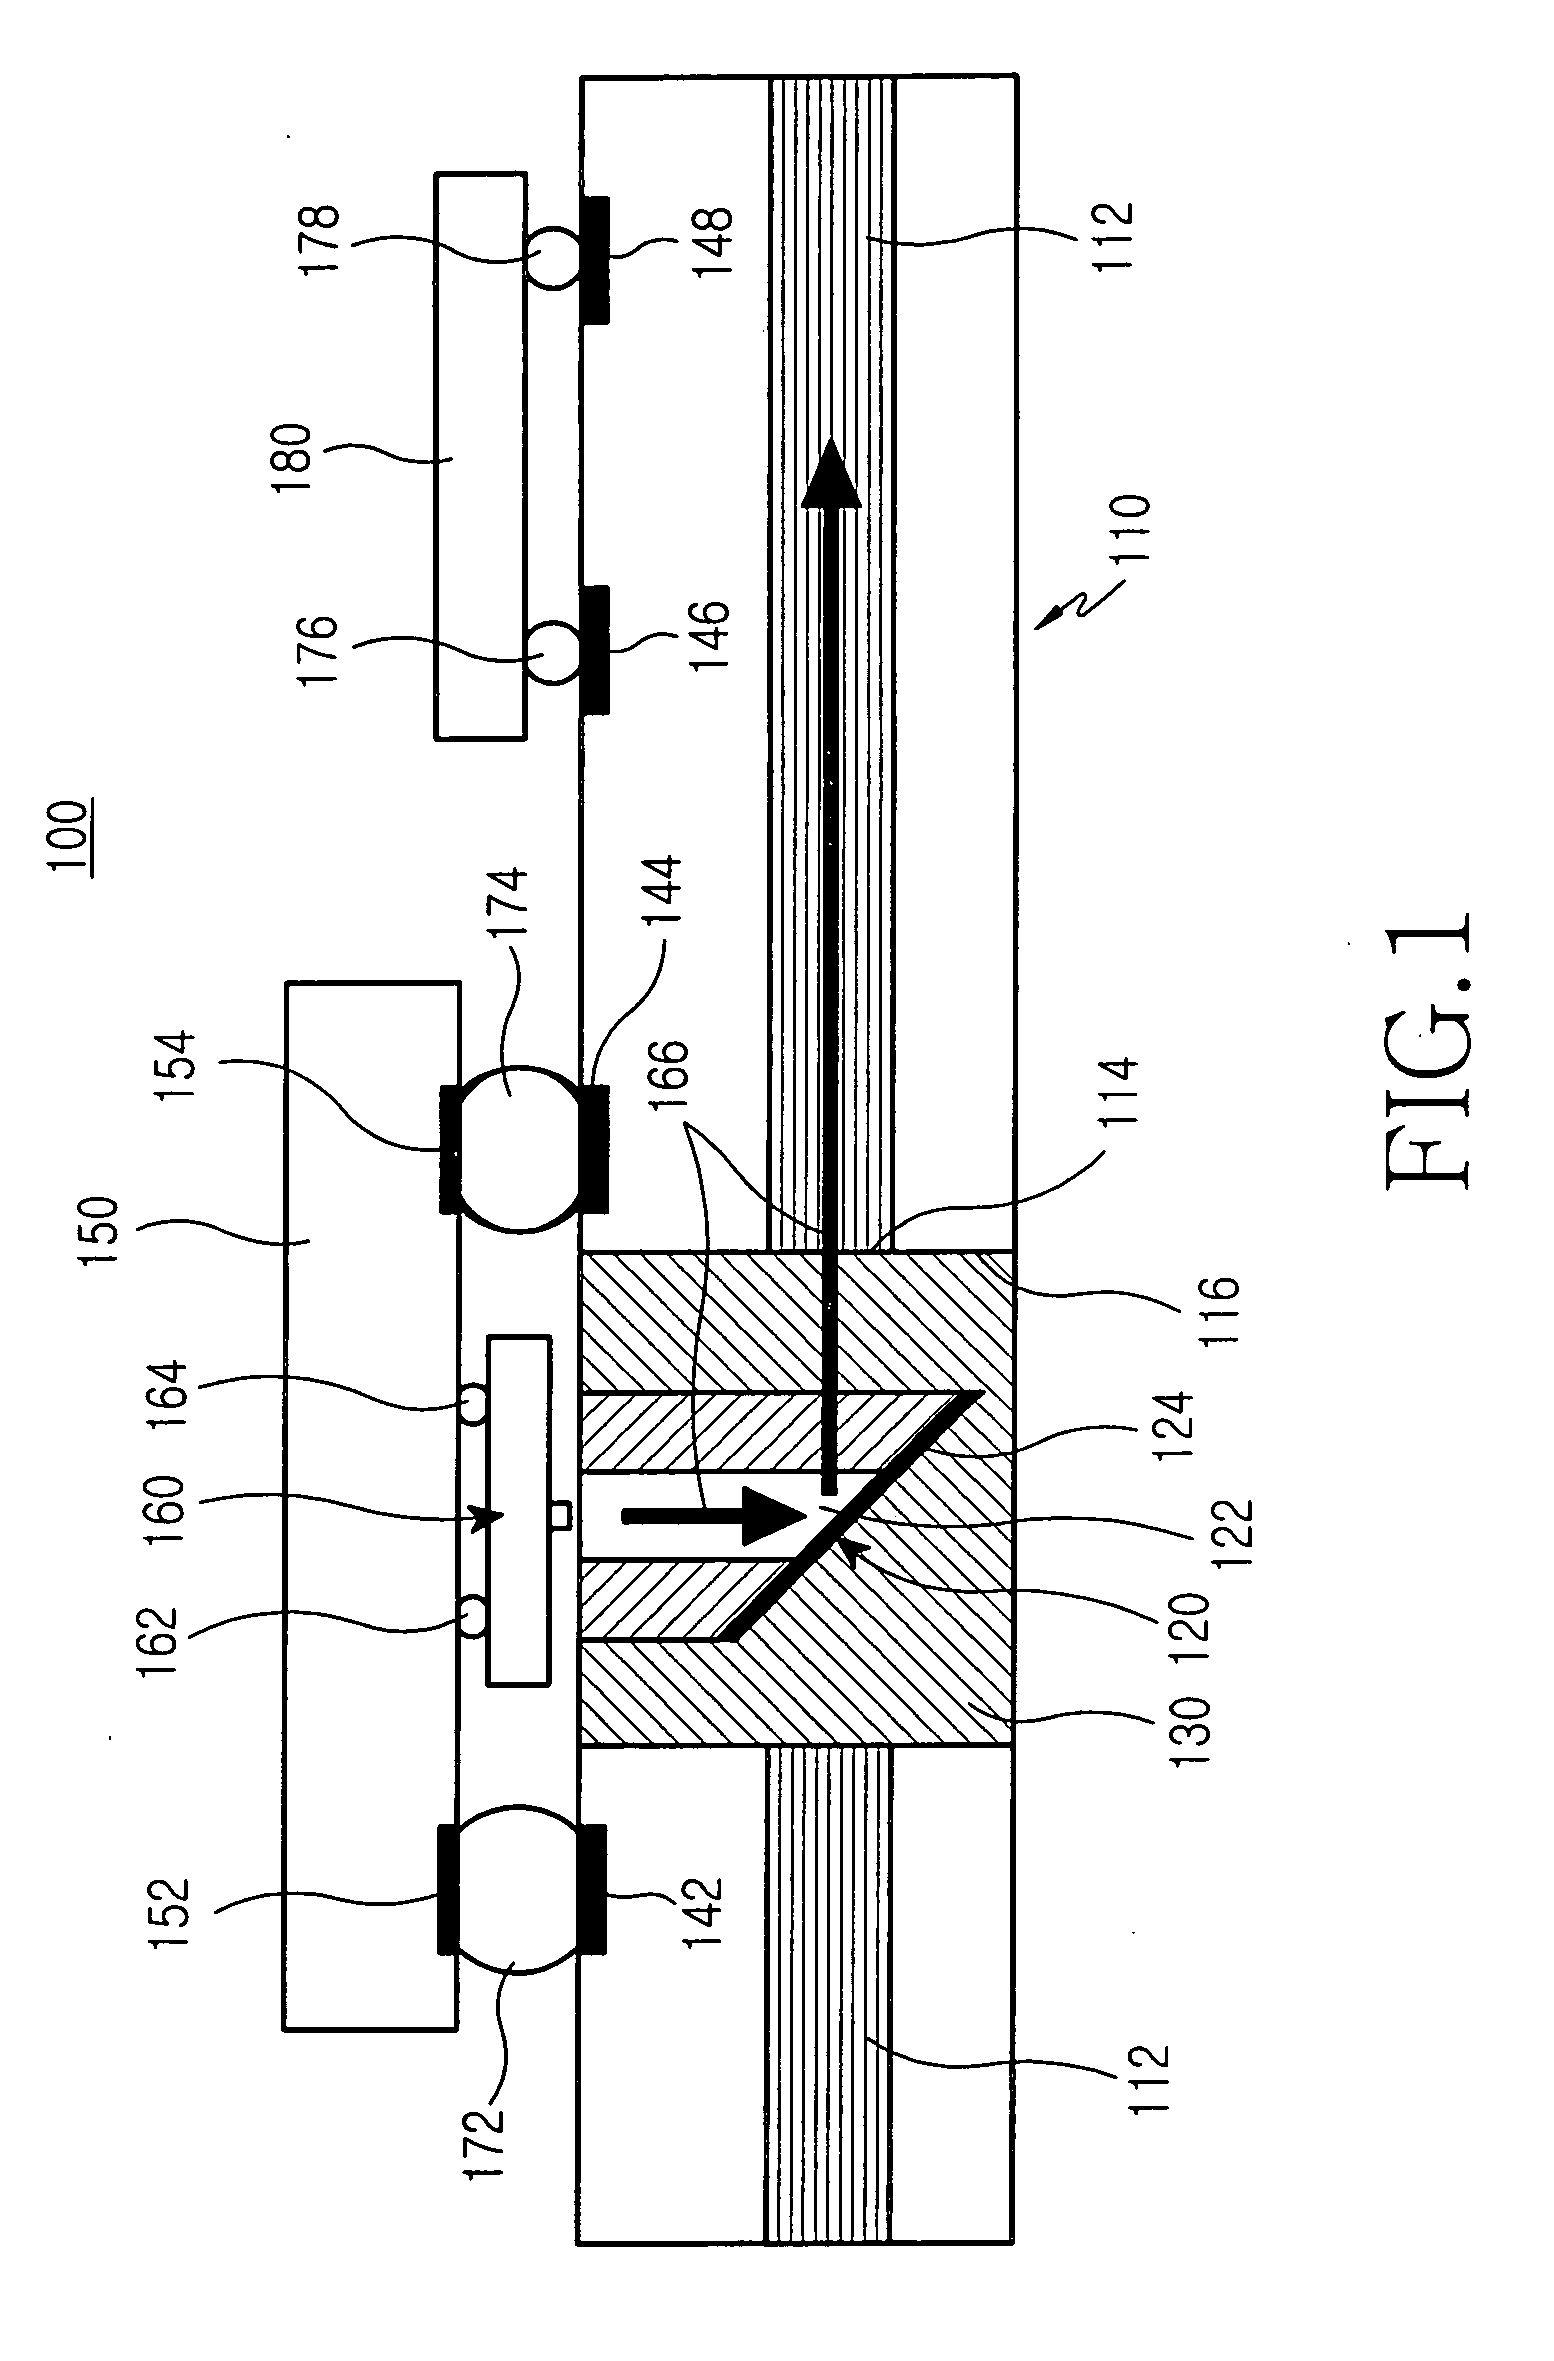 Packaging apparatus for optical interconnection on optical printed circuit board